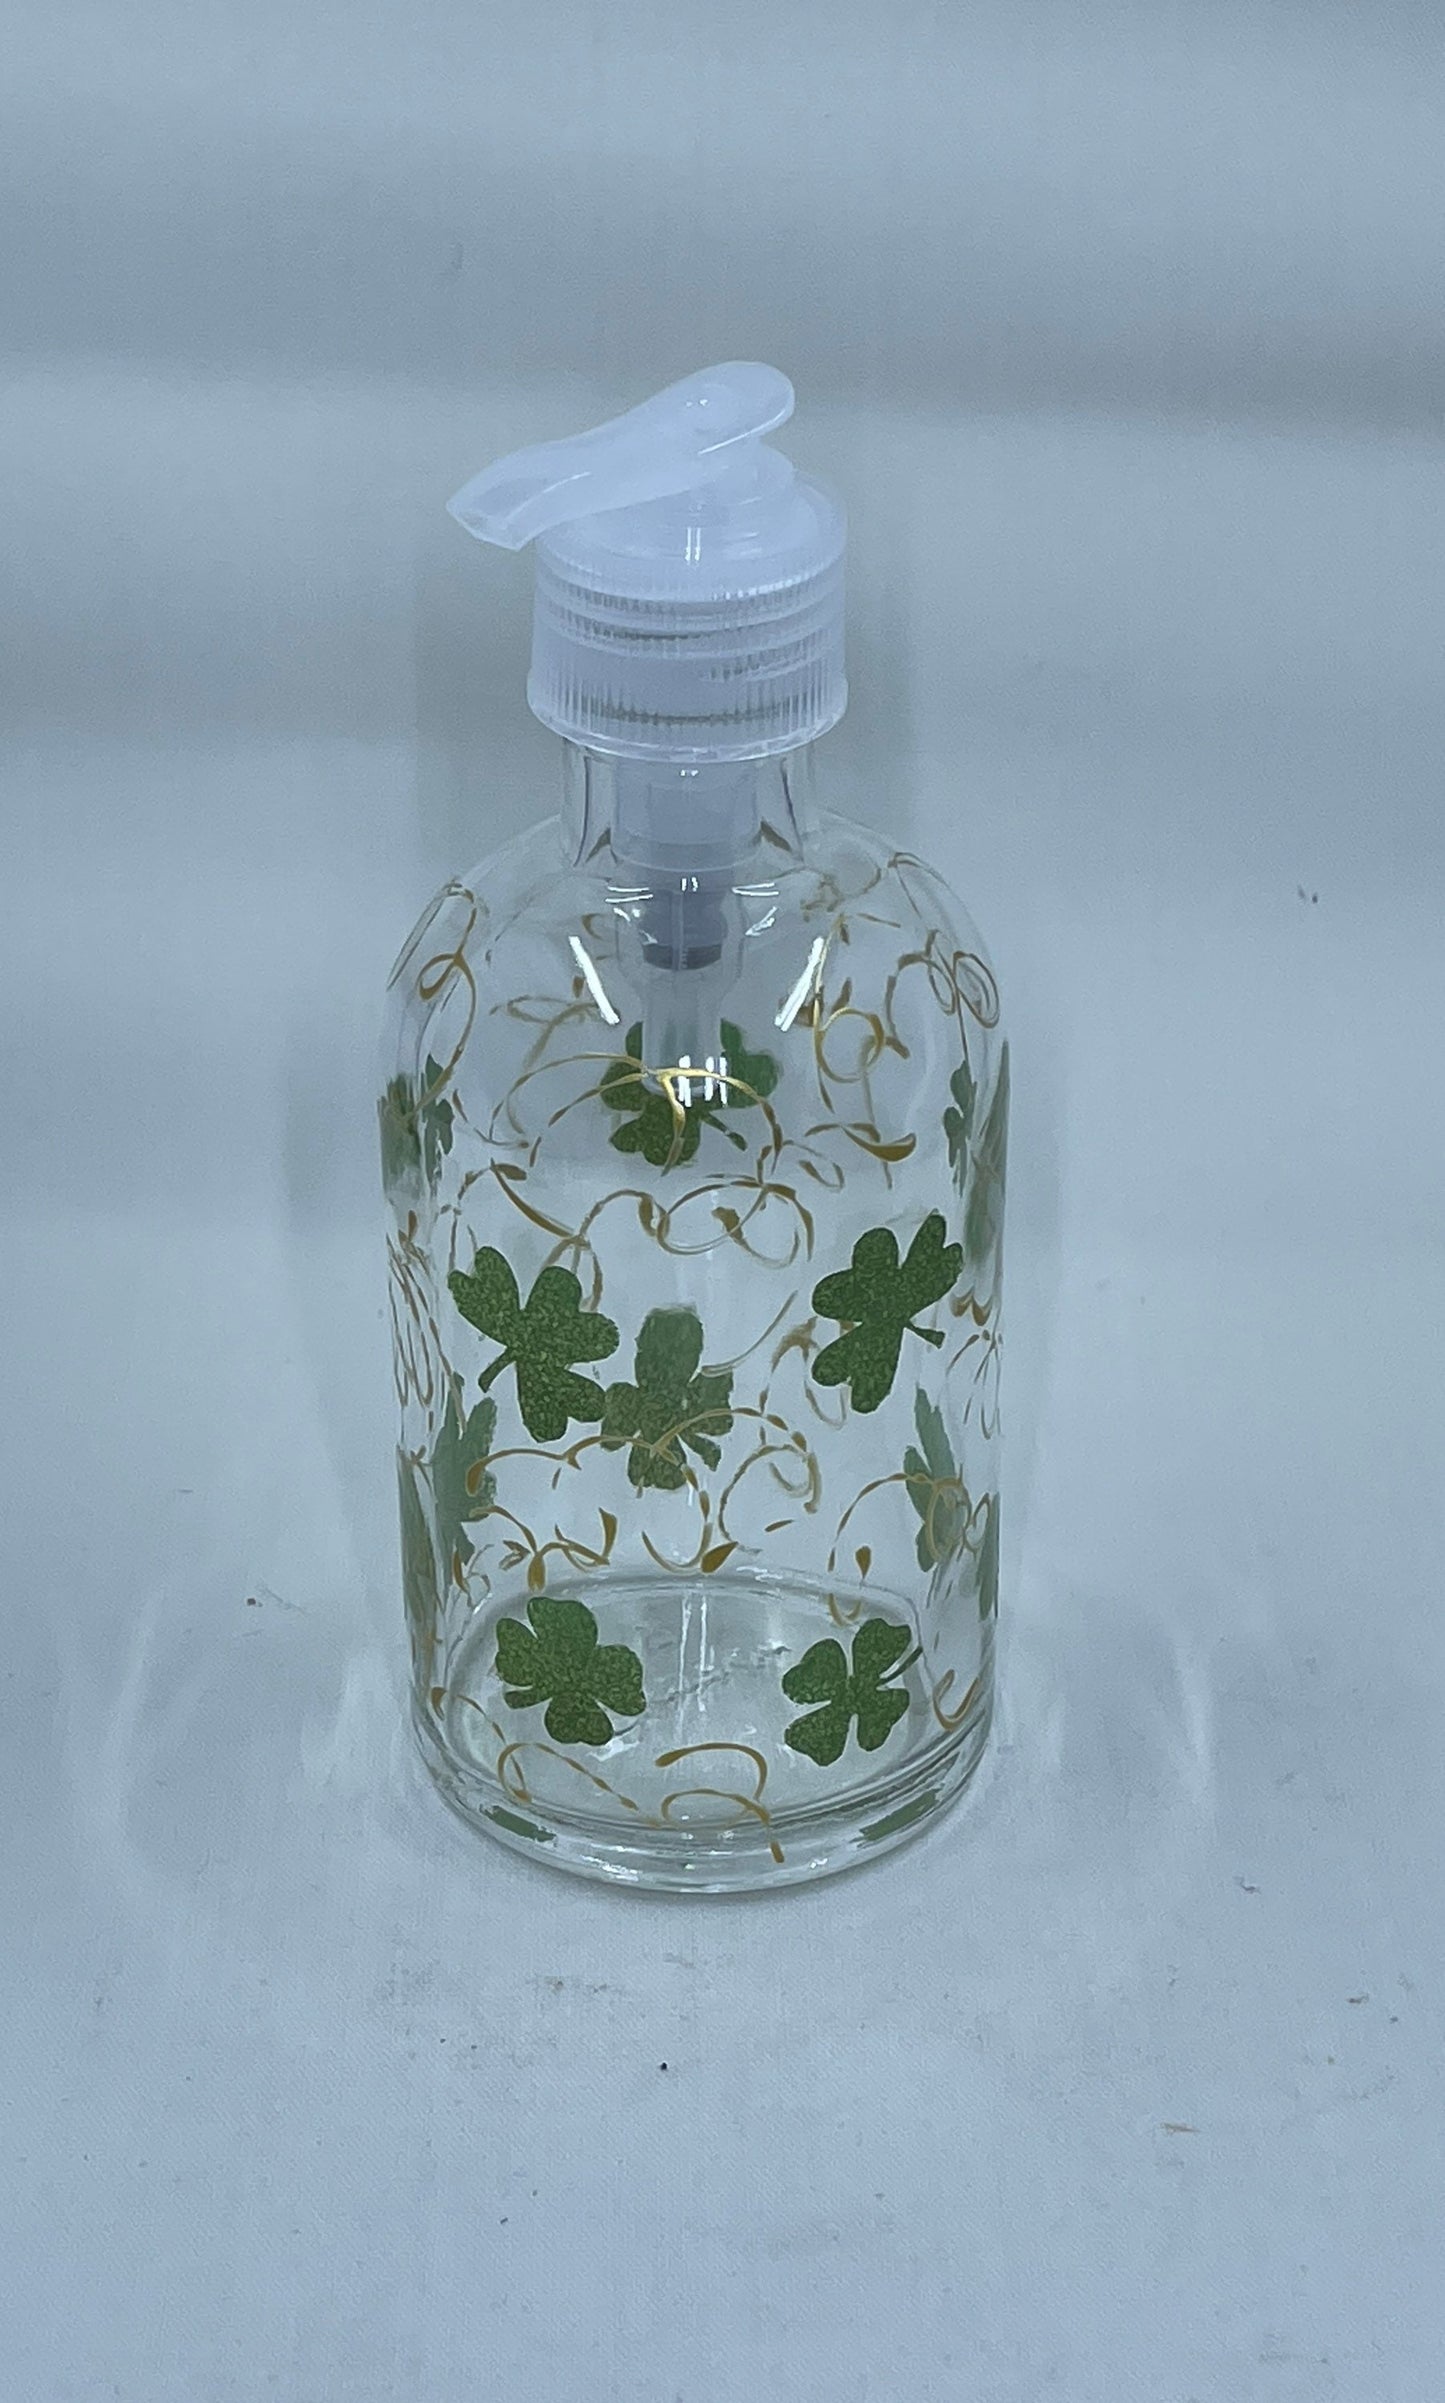 St. Patrick's Day Soap or Lotion Dispenser with Green Clover and Golden Swirls